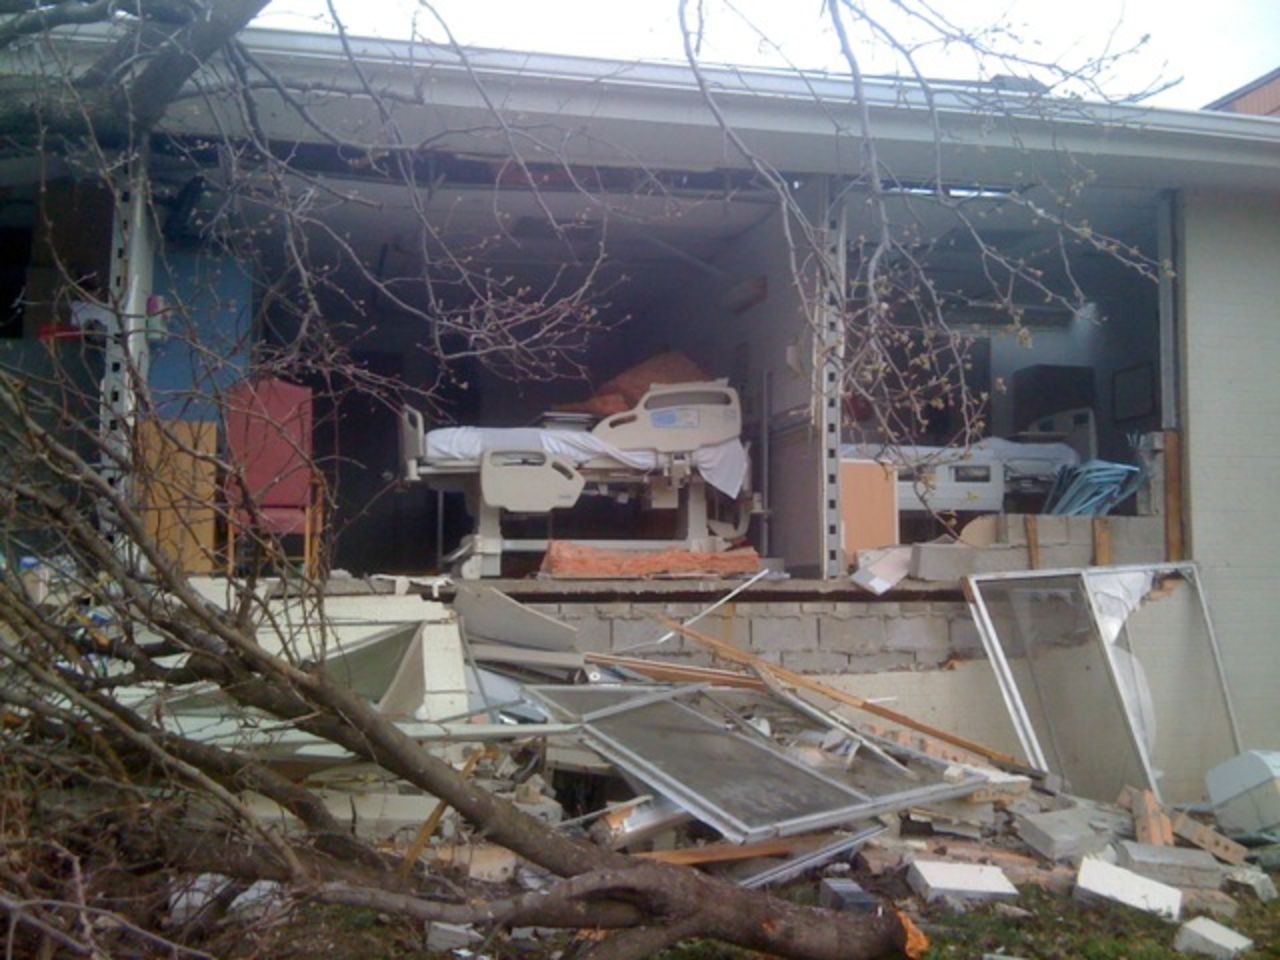 Hospital rooms were completely destroyed after a <a href="http://ireport.cnn.com/docs/DOC-755579">tornado</a> hit Harrisburg, Illinois in February. Jane Harper, a nurse there, took this photo after moving patients out of harm's way. She went to check one of the patient rooms, and found that the room was no longer there.